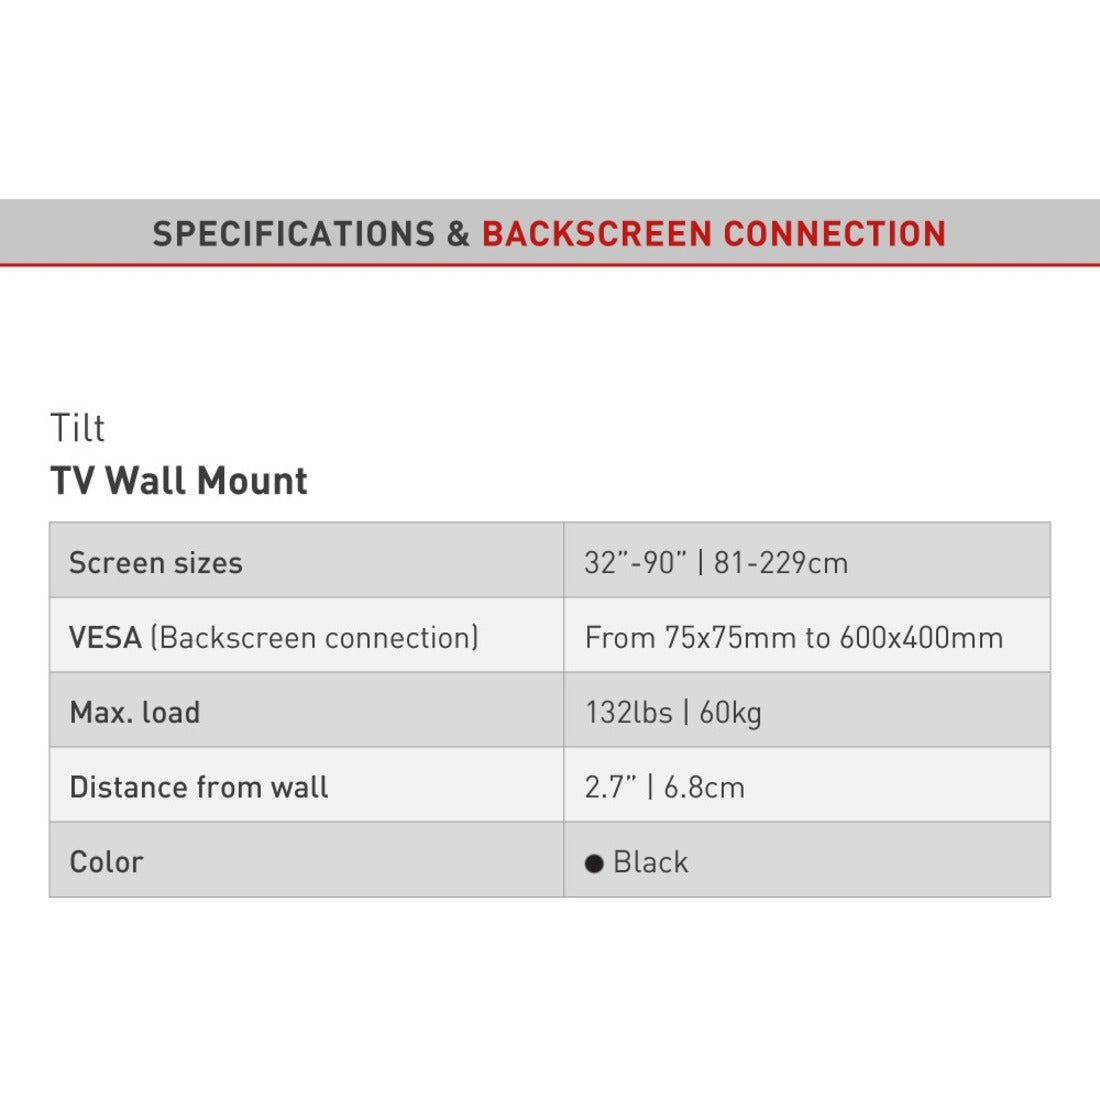 Barkan E410+.B Wall Mount for TV - Black, Tilt TV Wall Mount for 32-90" Screens and Weight up to 132lbs